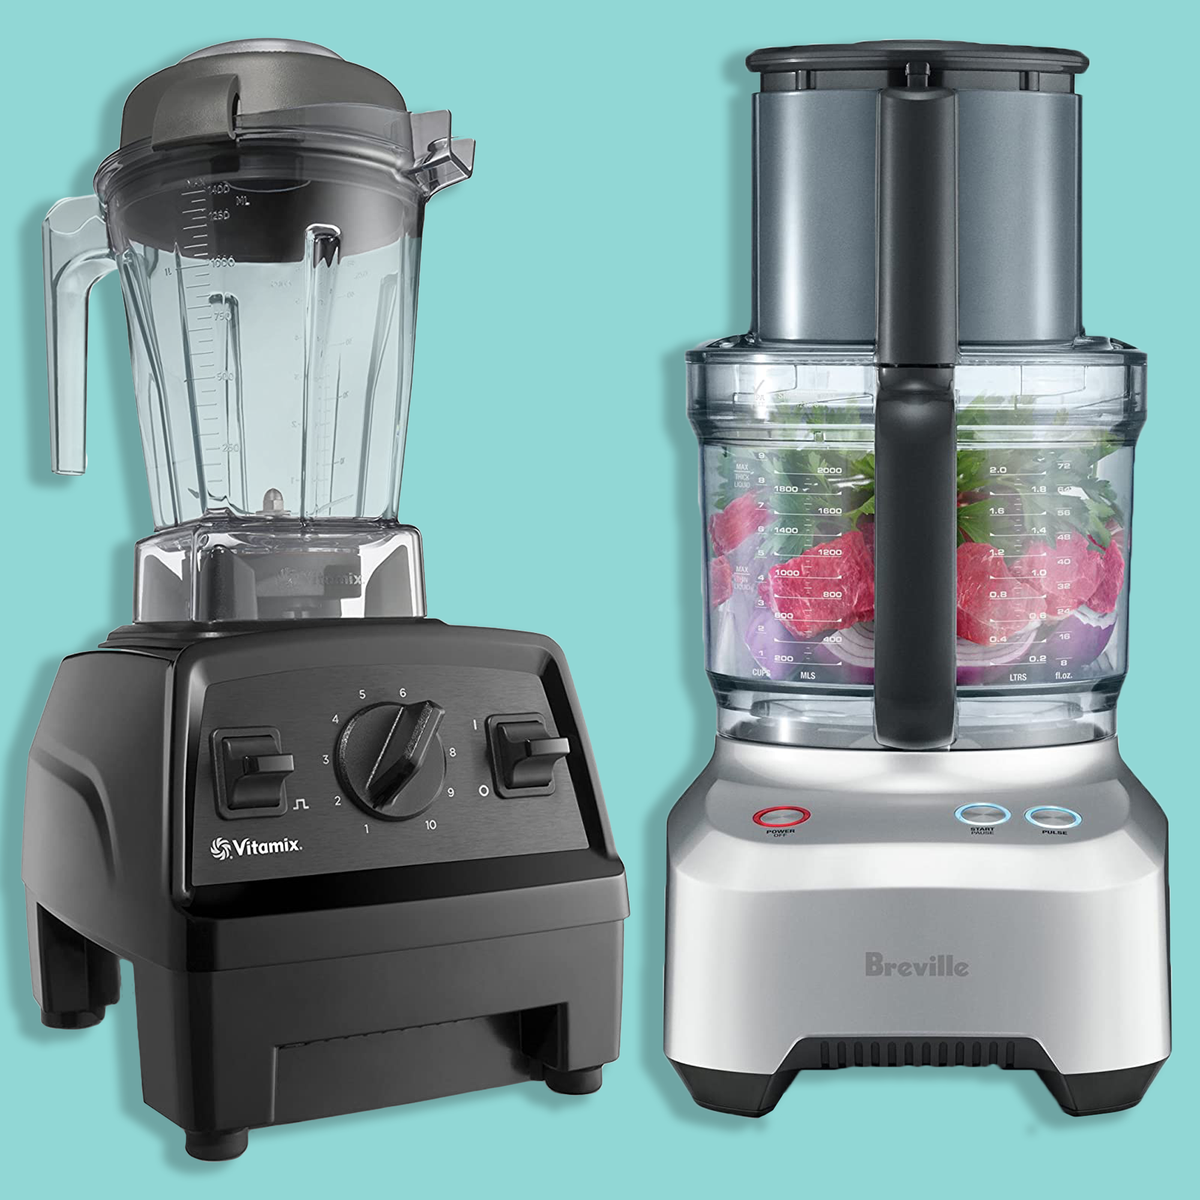 Food Processors What's the Difference?